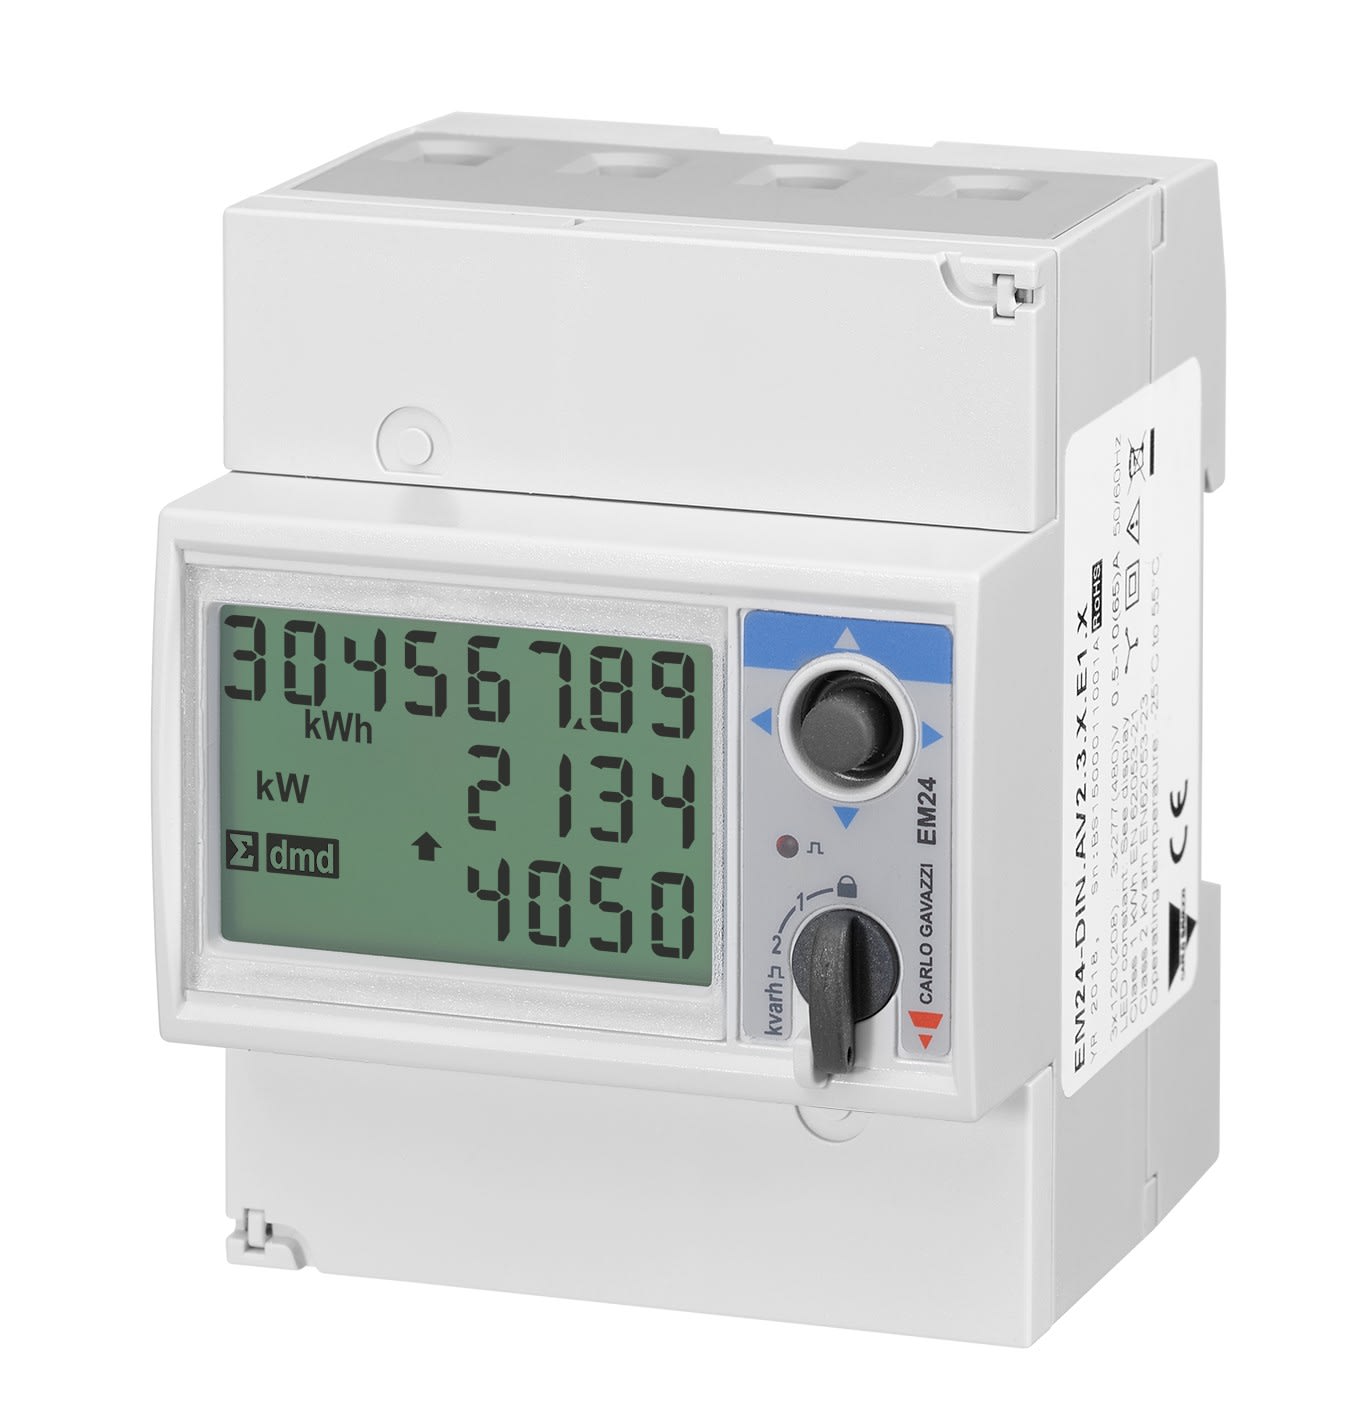 Carlo Gavazzi - Analyseur d'energie compact 3-phase direct 10(65)A Ethernet Modbus-TCP